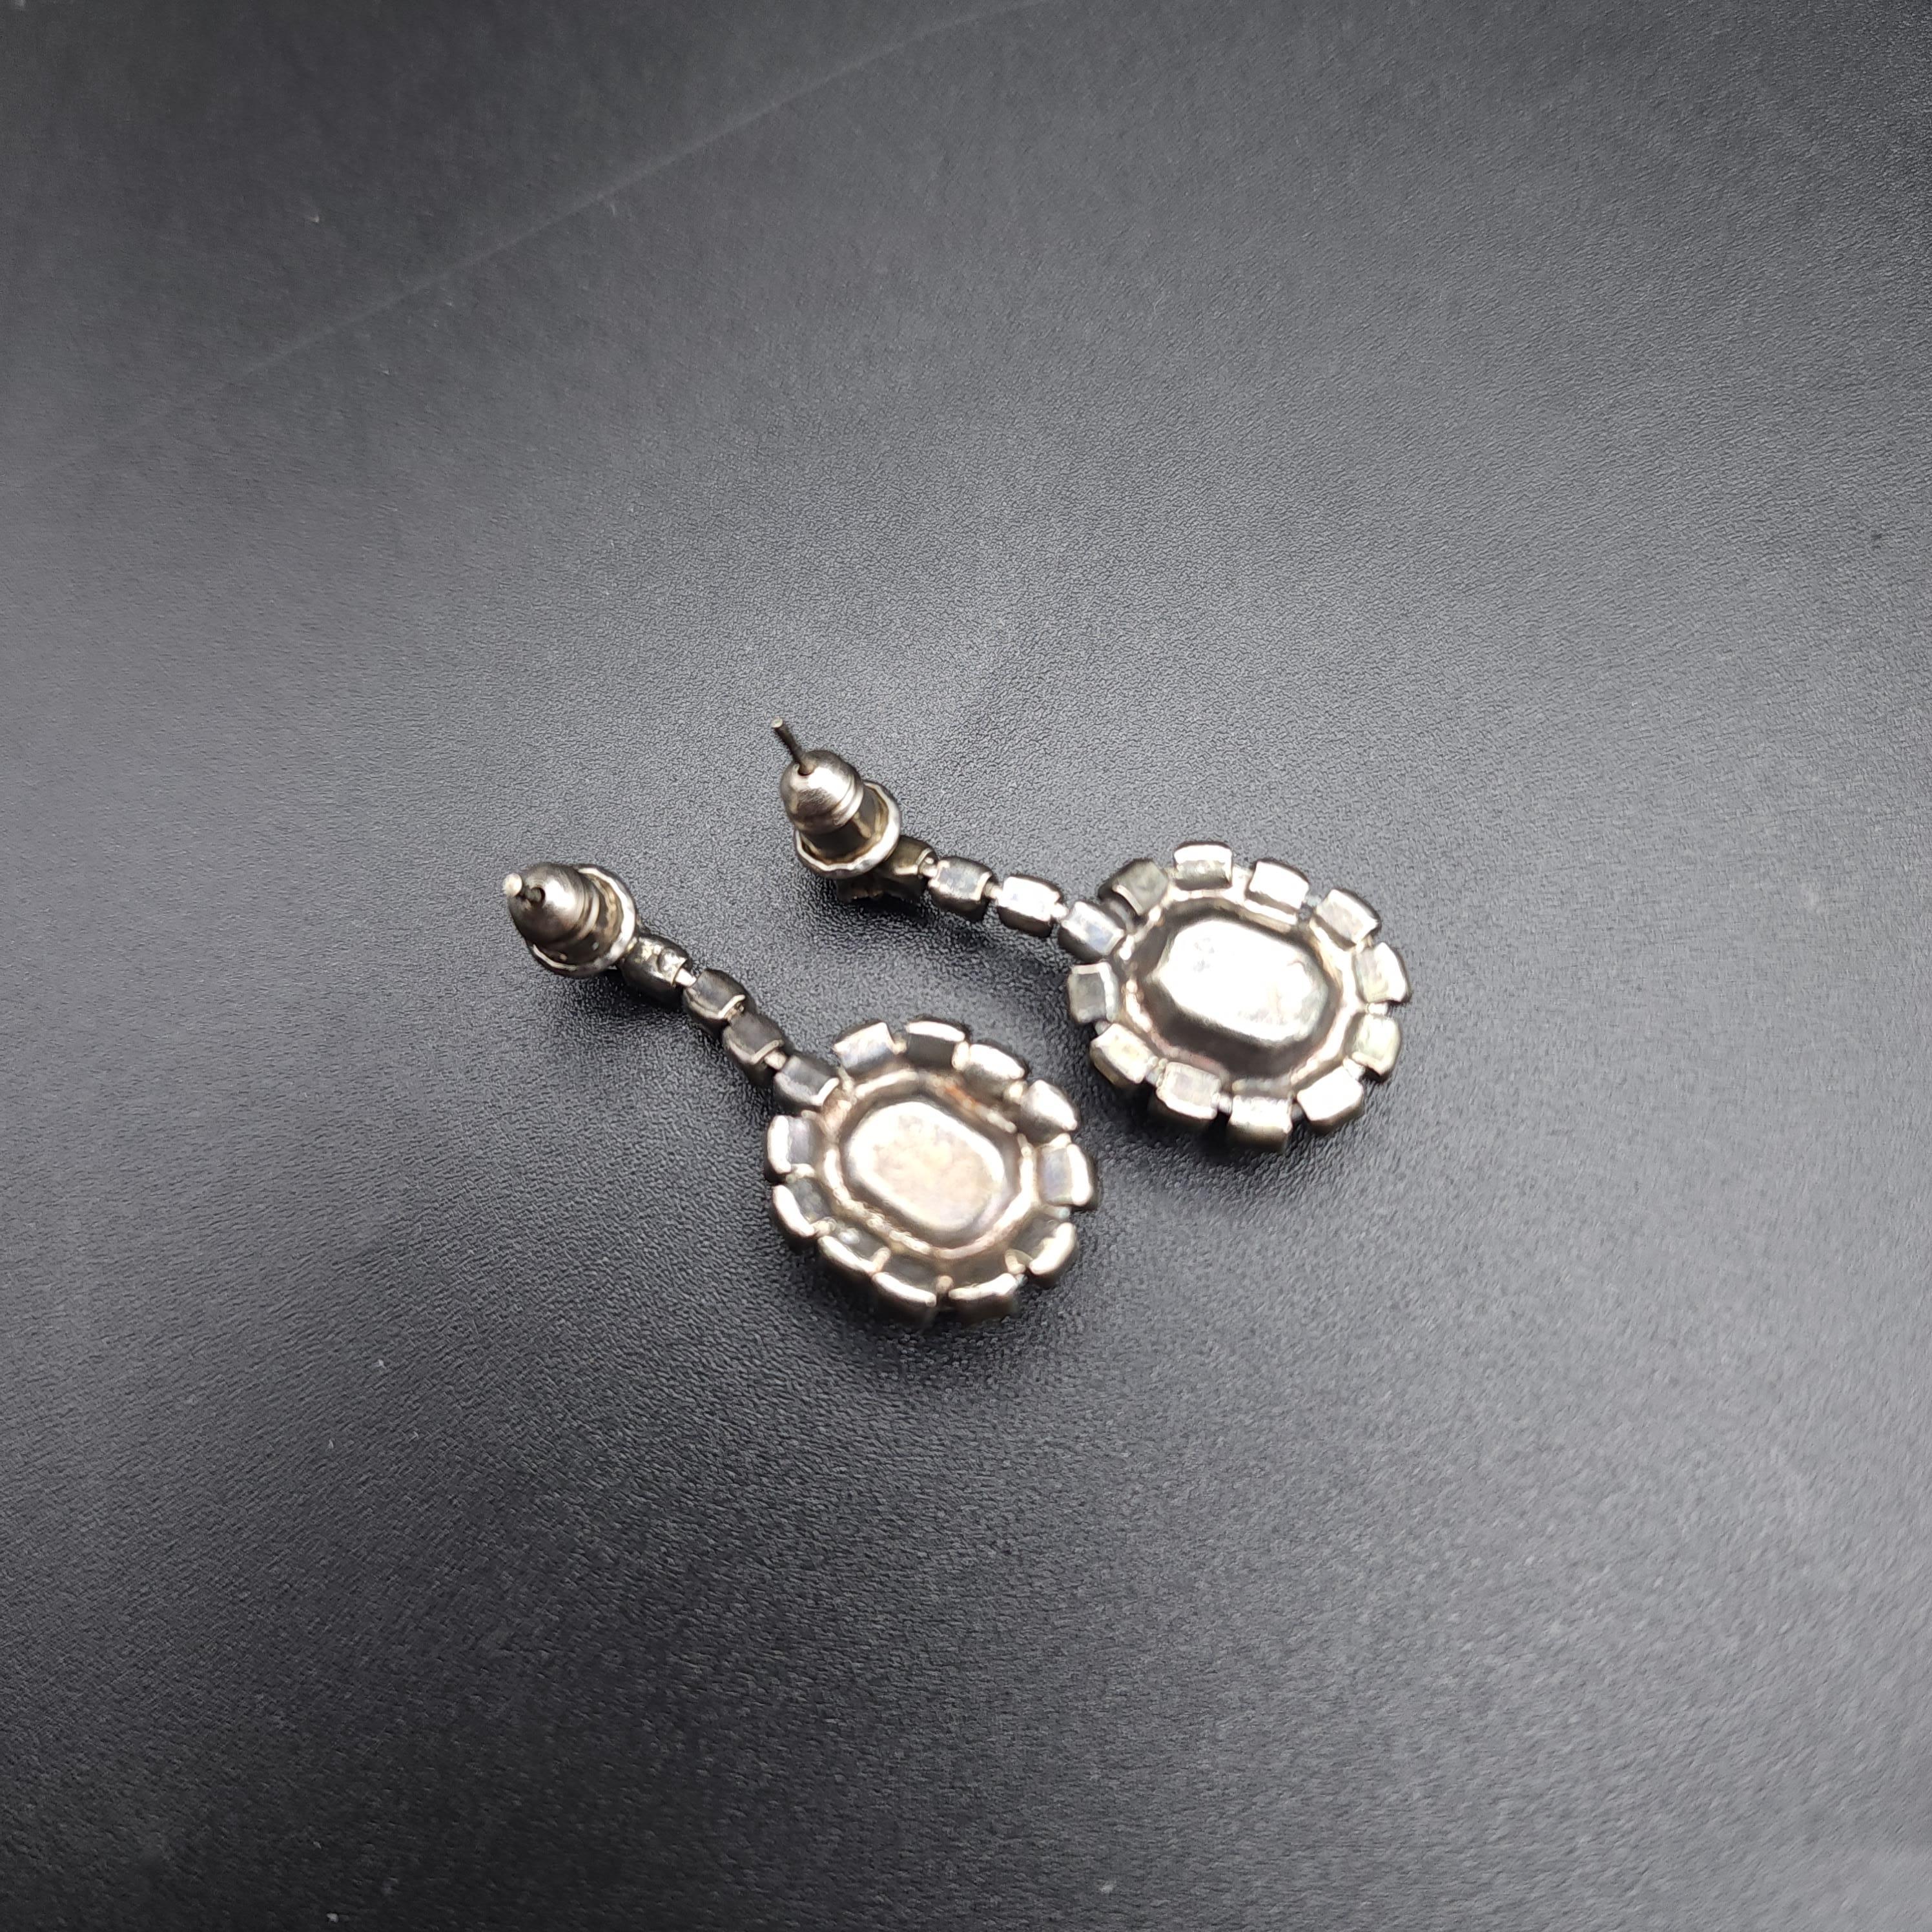 Round Cut Retro Crystal Dangle Earrings, Square Cut Centerpiece, Prong-Set, Silver Tone For Sale